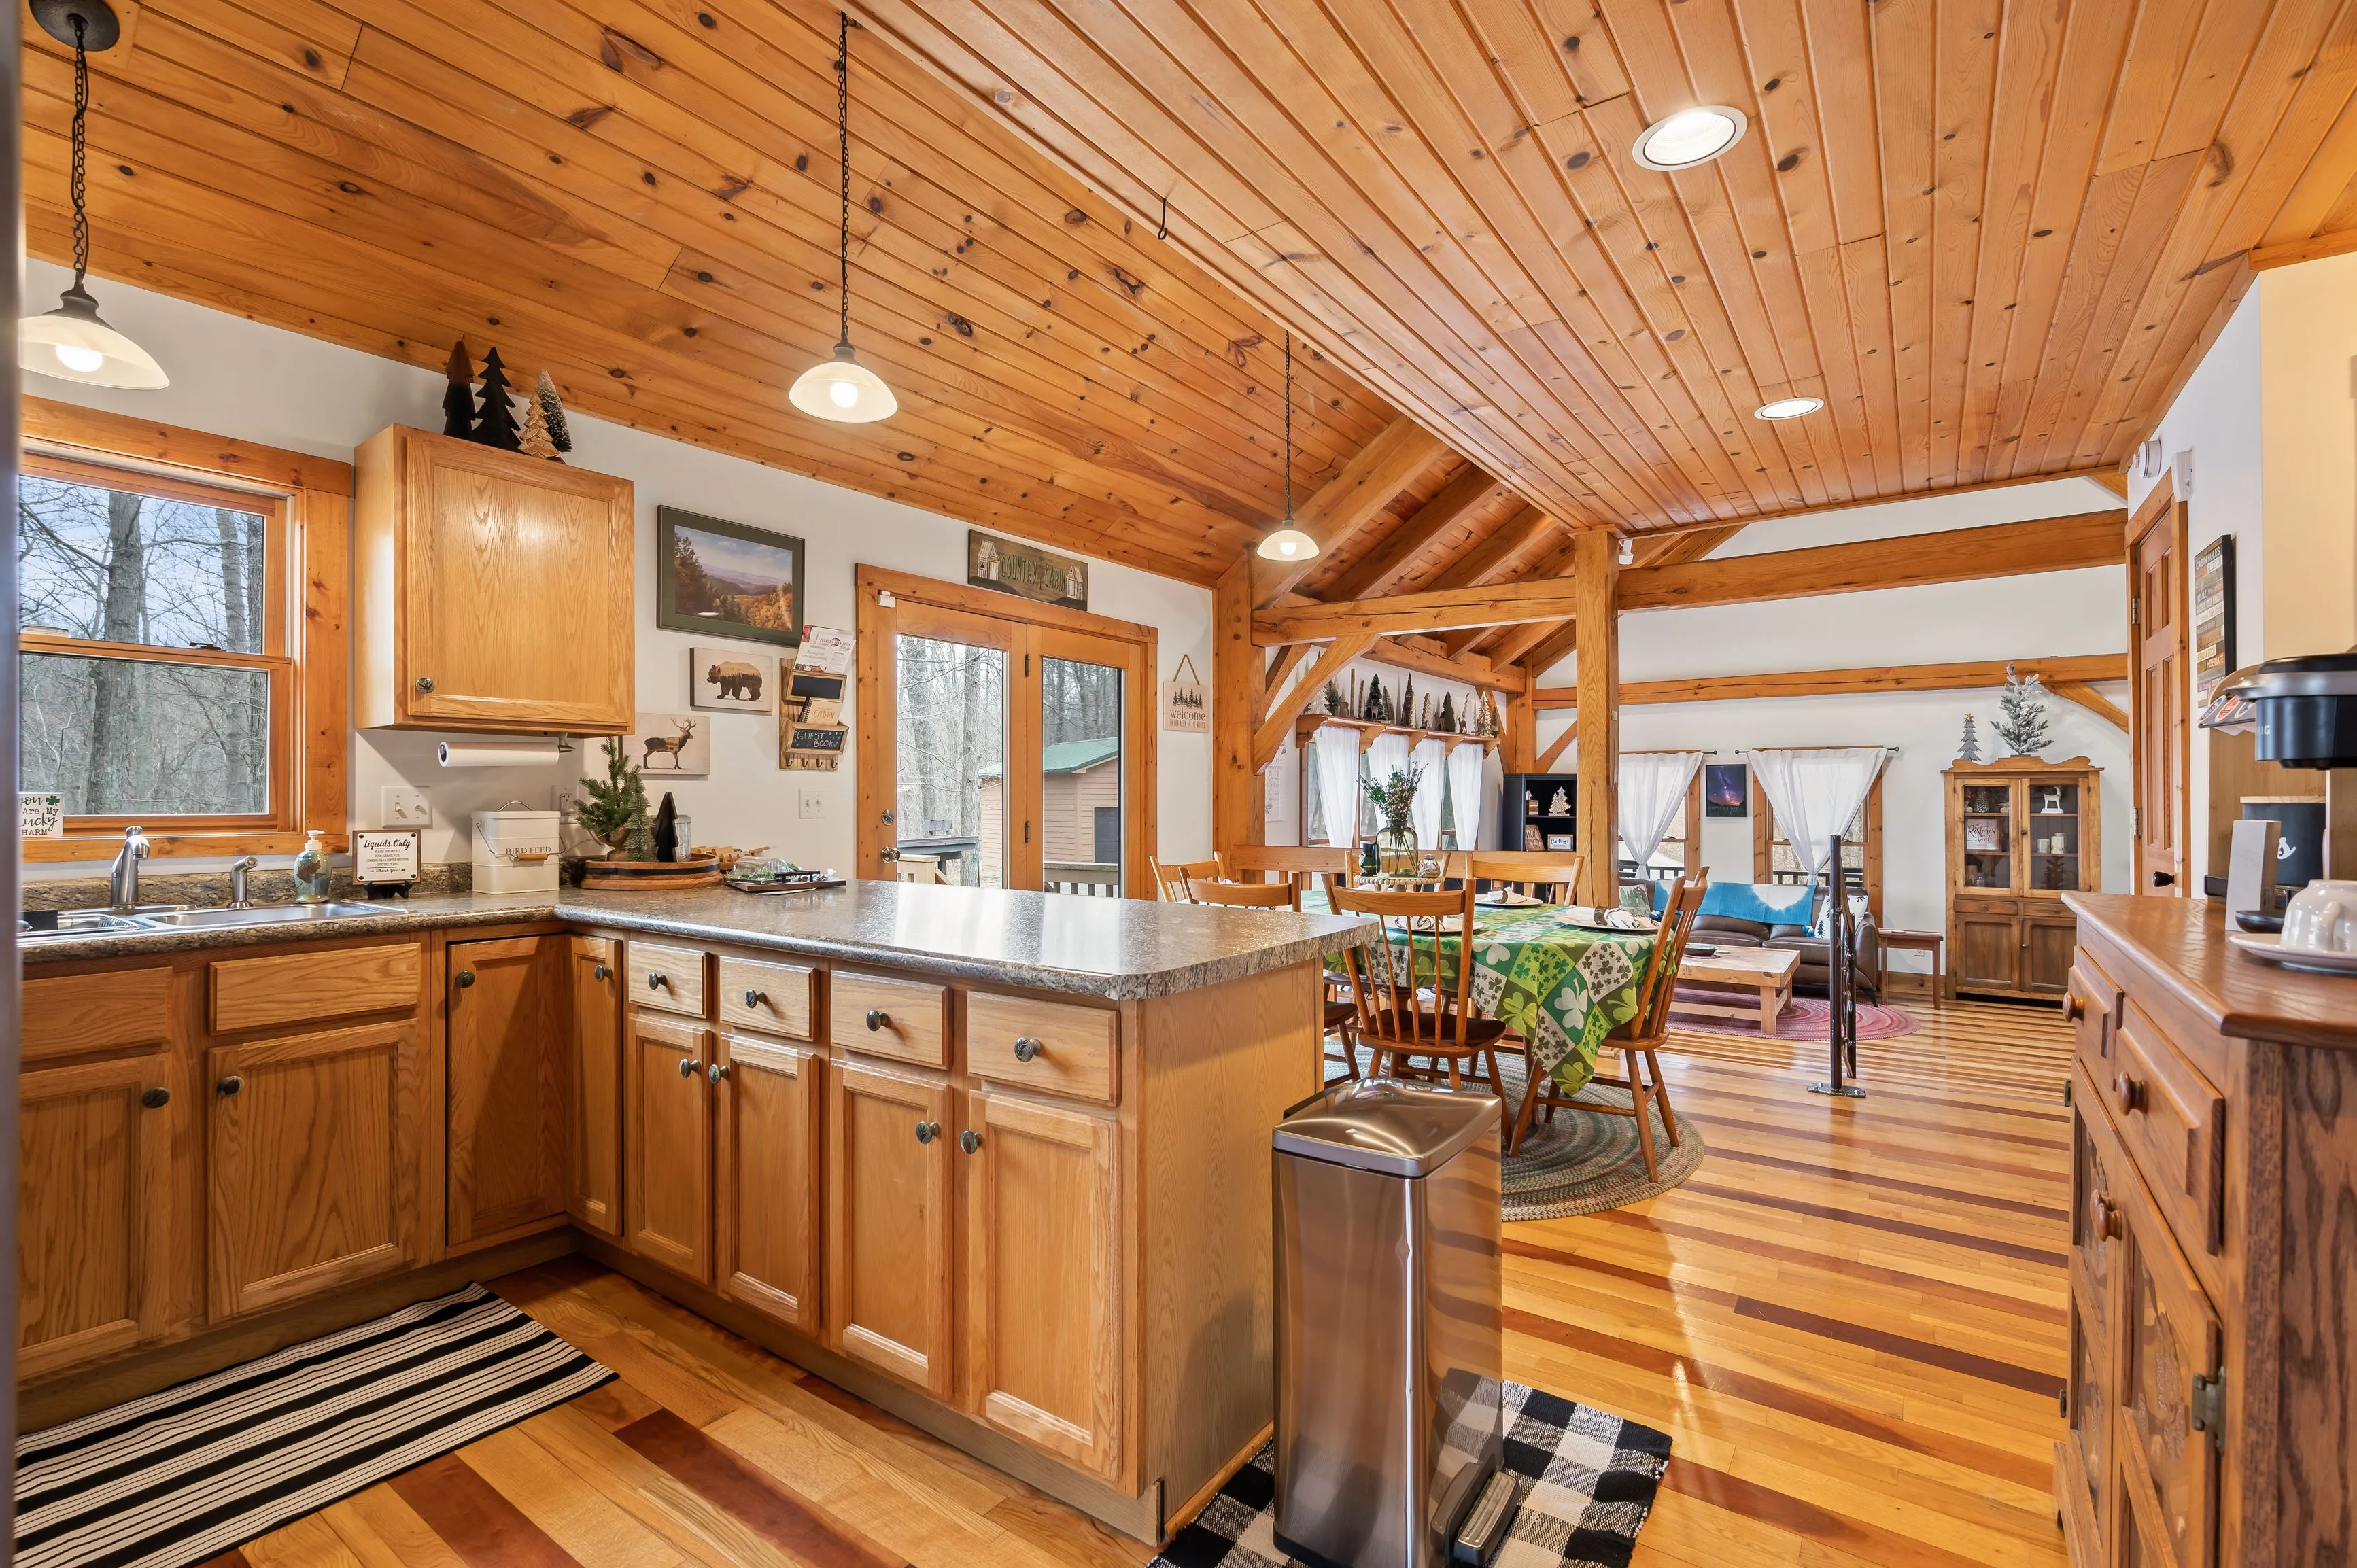 Spacious wooden cabin interior with a fully equipped kitchen, dining area, and a glimpse into the cozy living room with exposed beams and hardwood floors.